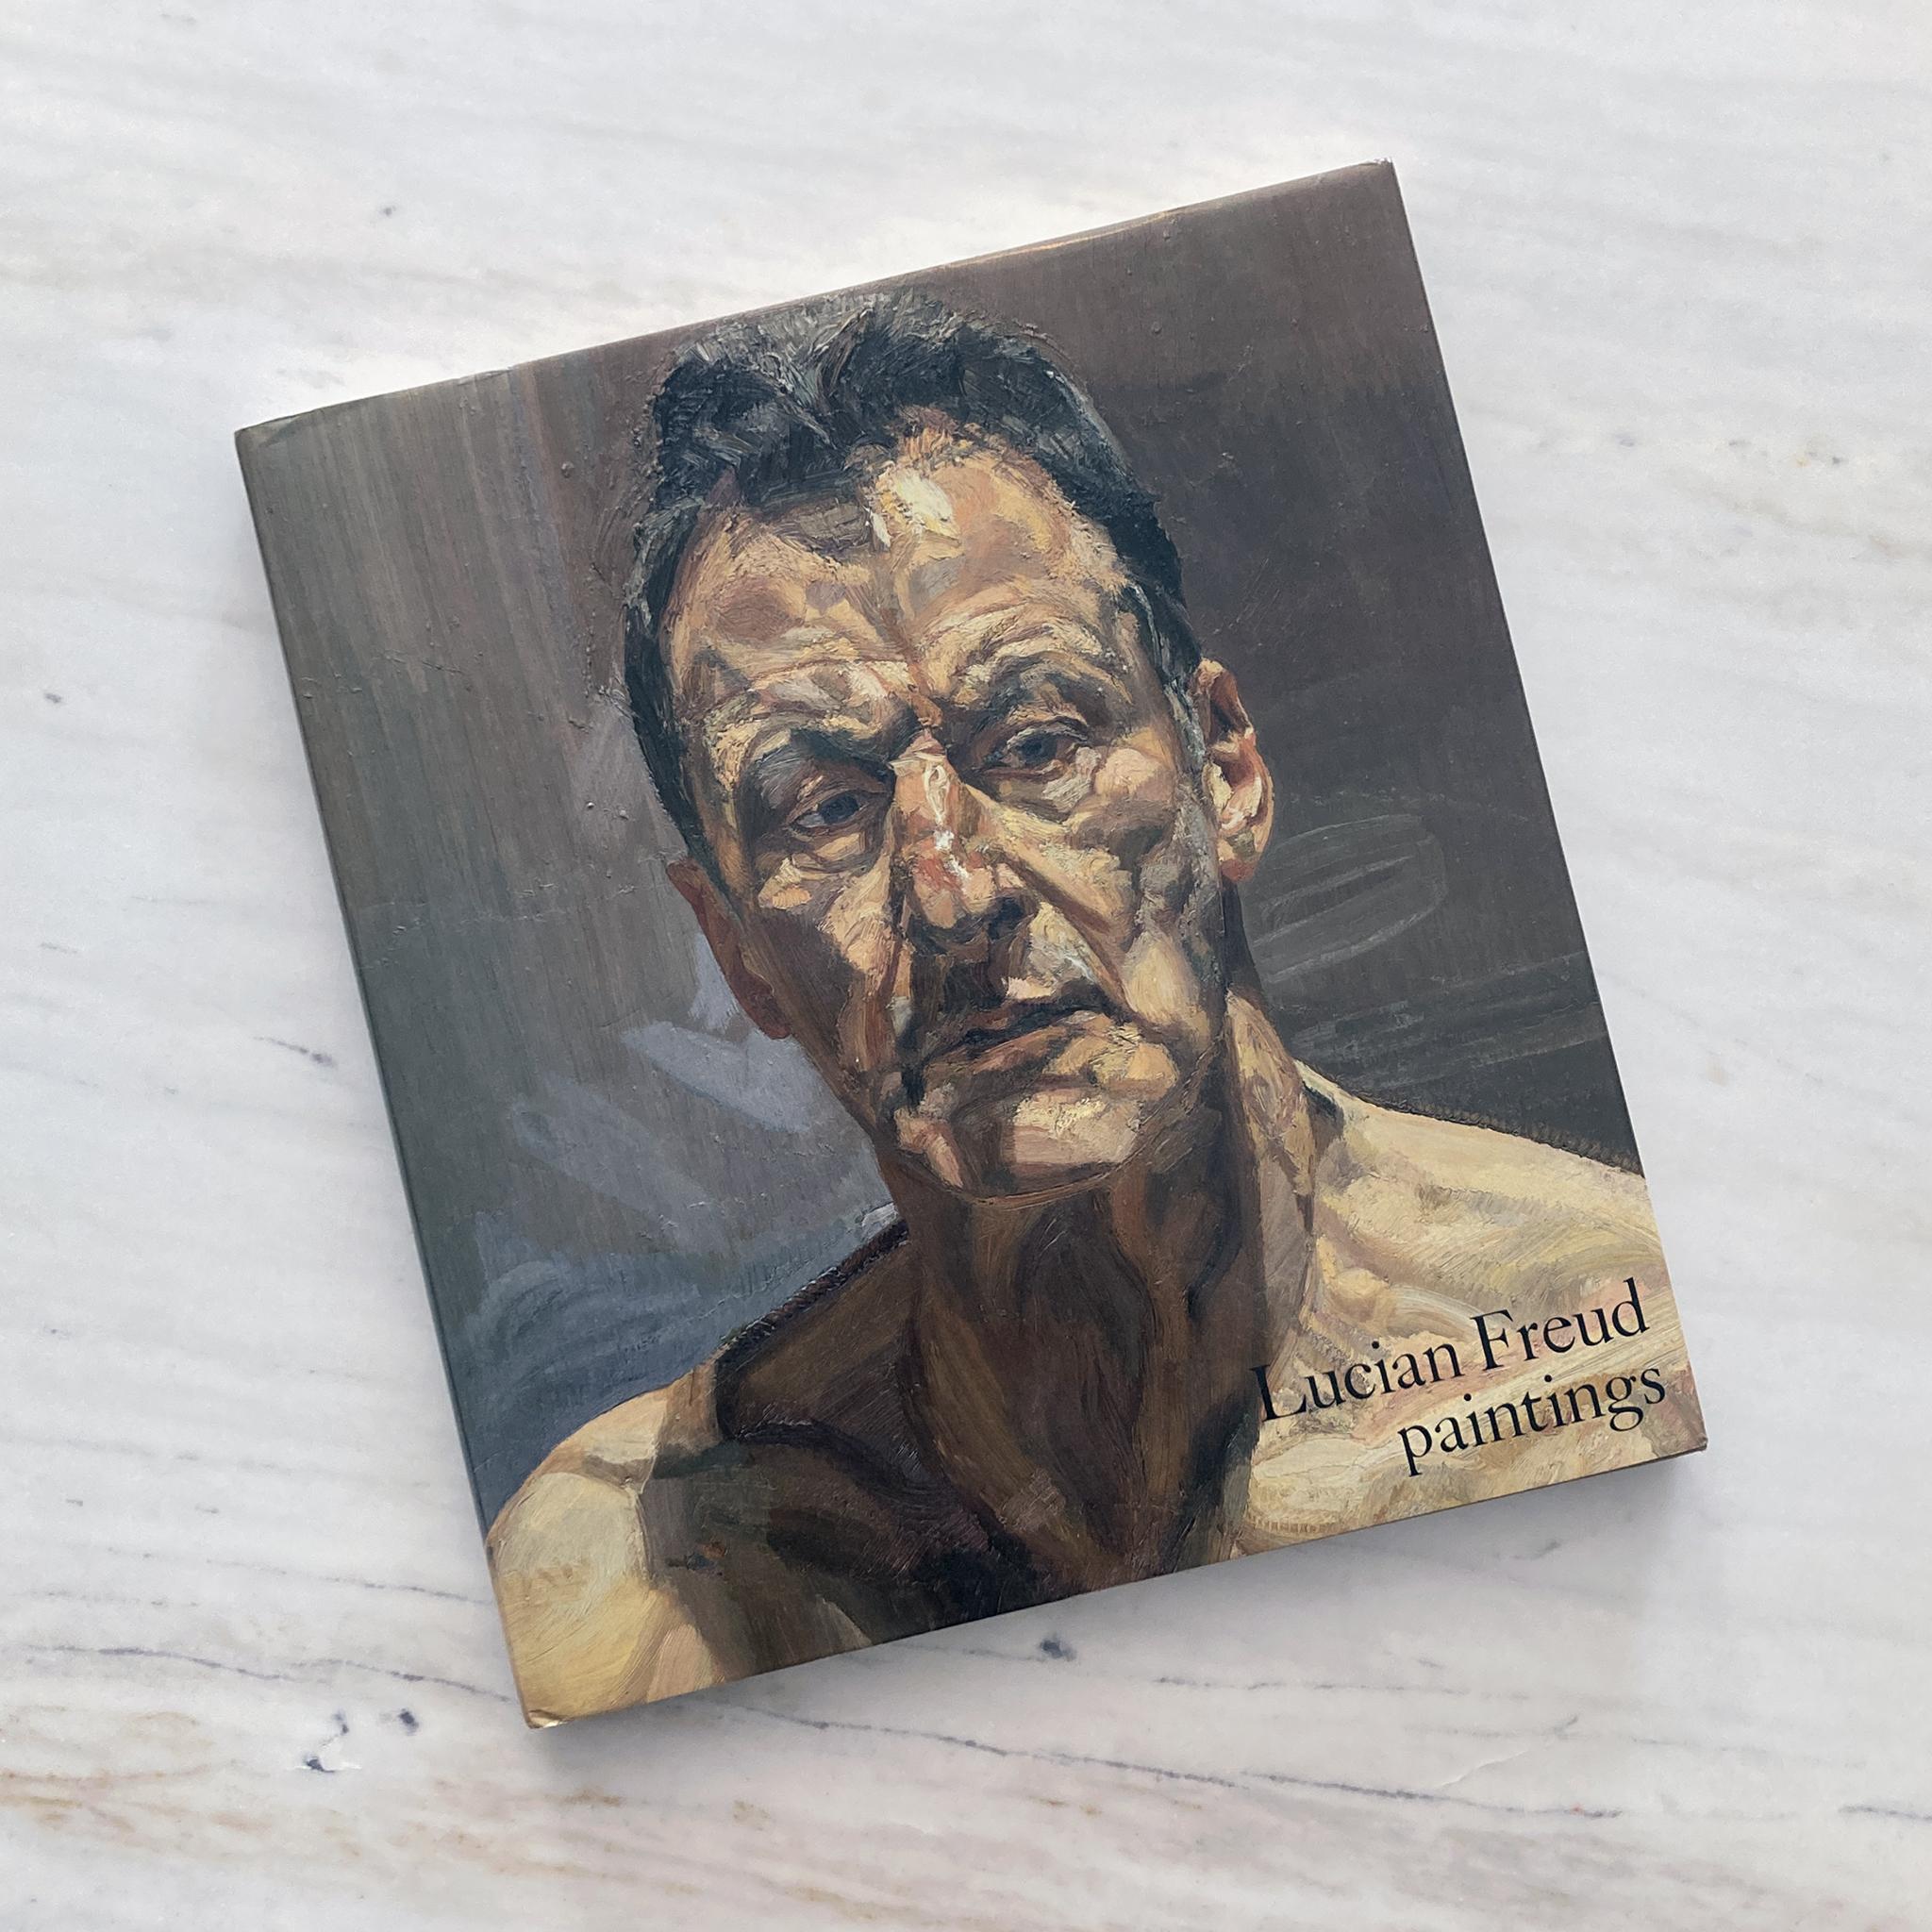 Lucian Freud Paintings book, by Robert Hughes. Printed in the UK by Thames and Hudson, 1987 First Edition. Hardcover, text in English.

Lucian Freud's startling, disconcerting paintings are powerful and moving visual images. His distinctive